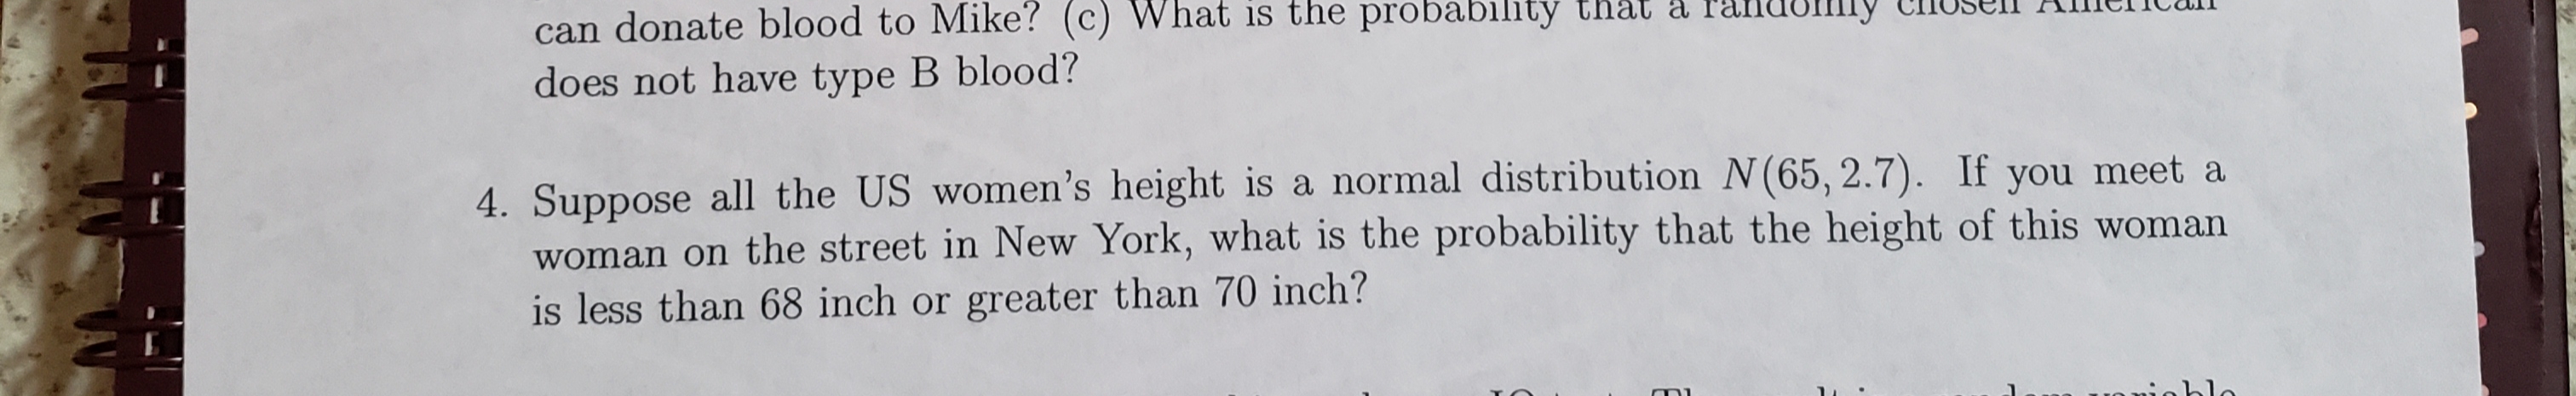 can donate blood to Mike? (c) What is the probability that a randomiy closen A
does not have type B blood?
4. Suppose all the US women's height is a normal distribution N(65, 2.7). If you meet a
woman on the street in New York, what is the probability that the height of this woman
is less than 68 inch or greater than 70 inch?
